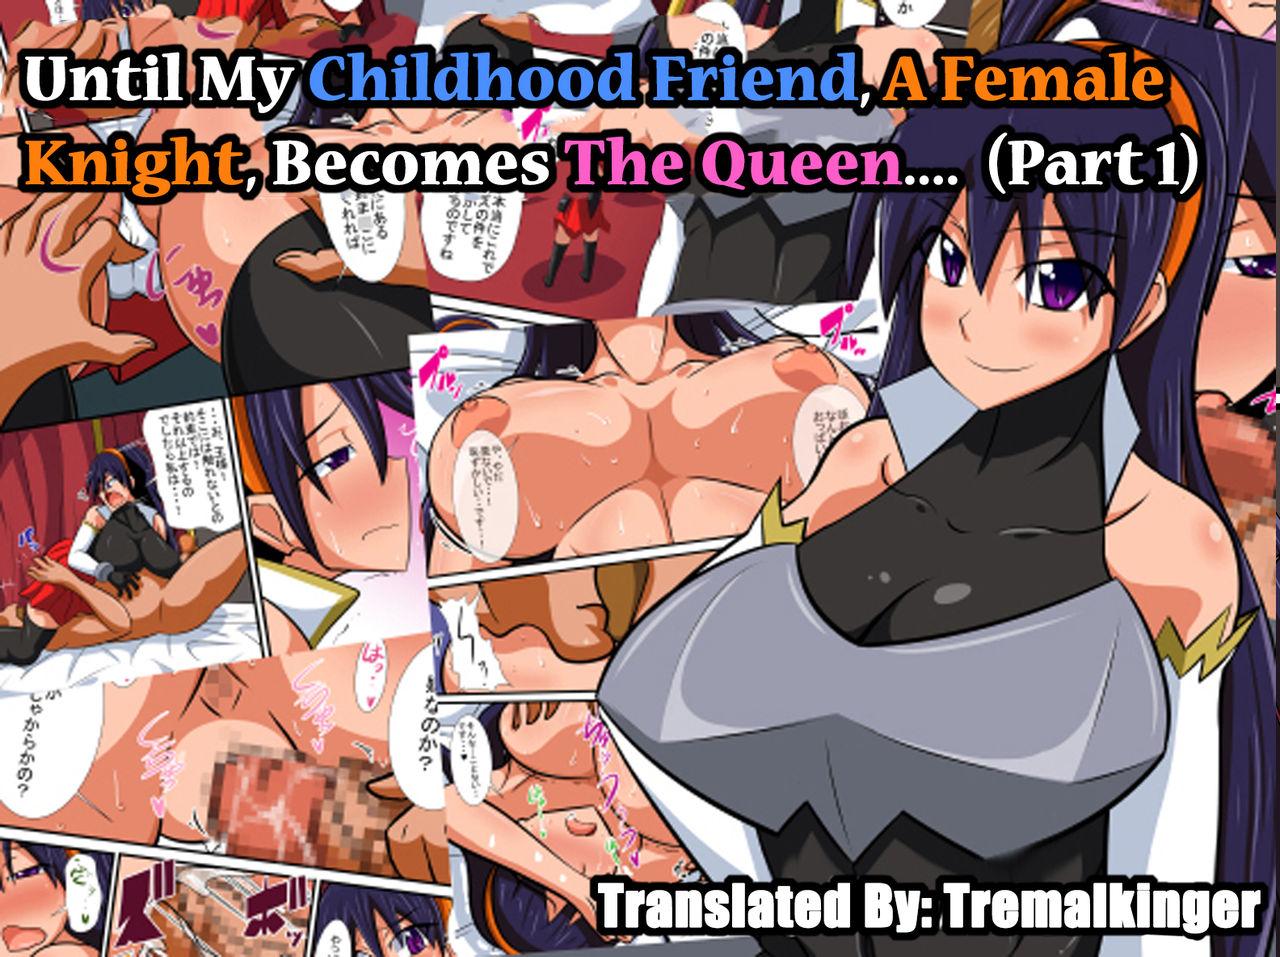 Awesome Osananajimi no Onna Kishi ga Oujo ni Naru Made Zenpen | Until My Childhood Friend, A Female Knight, Becomes The Queen Huge Ass - Page 1